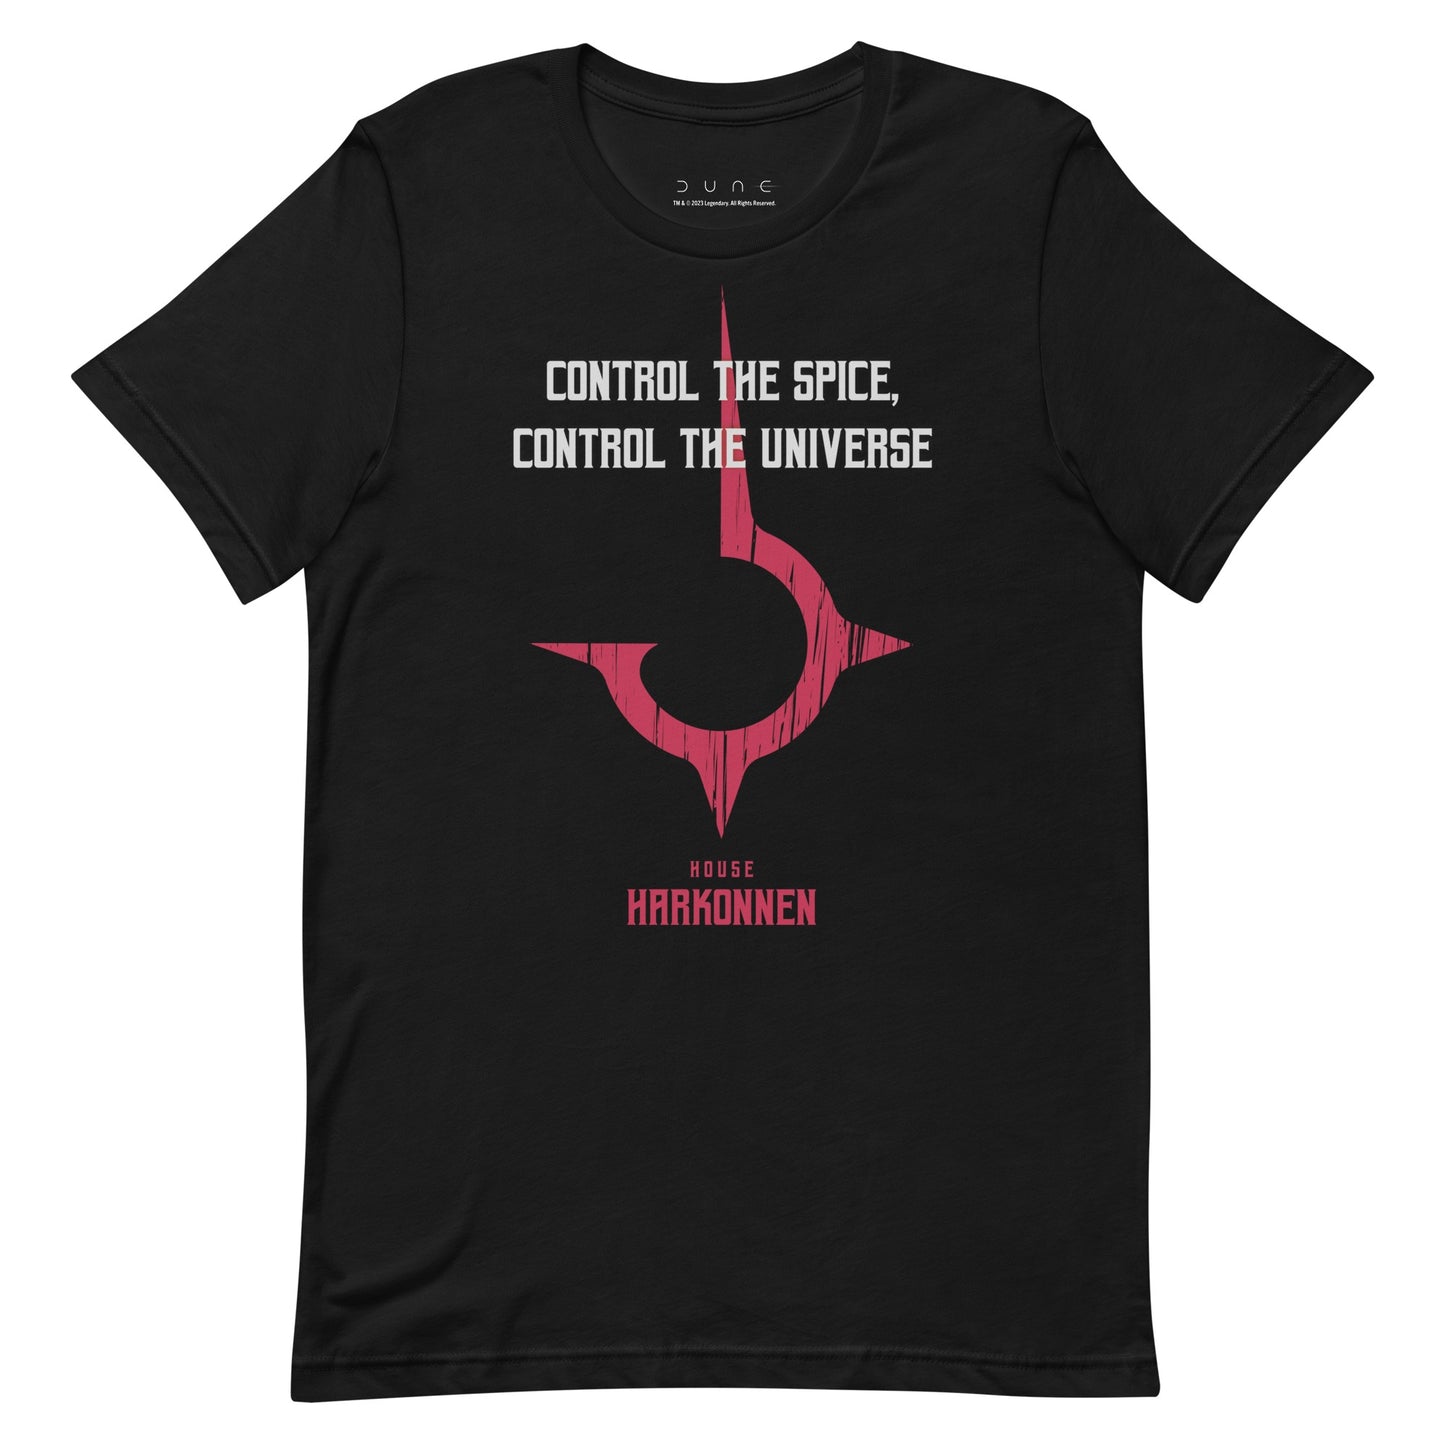 Dune Control The Spice, Control The Universe Customized Adult Short Sleeve T-Shirt